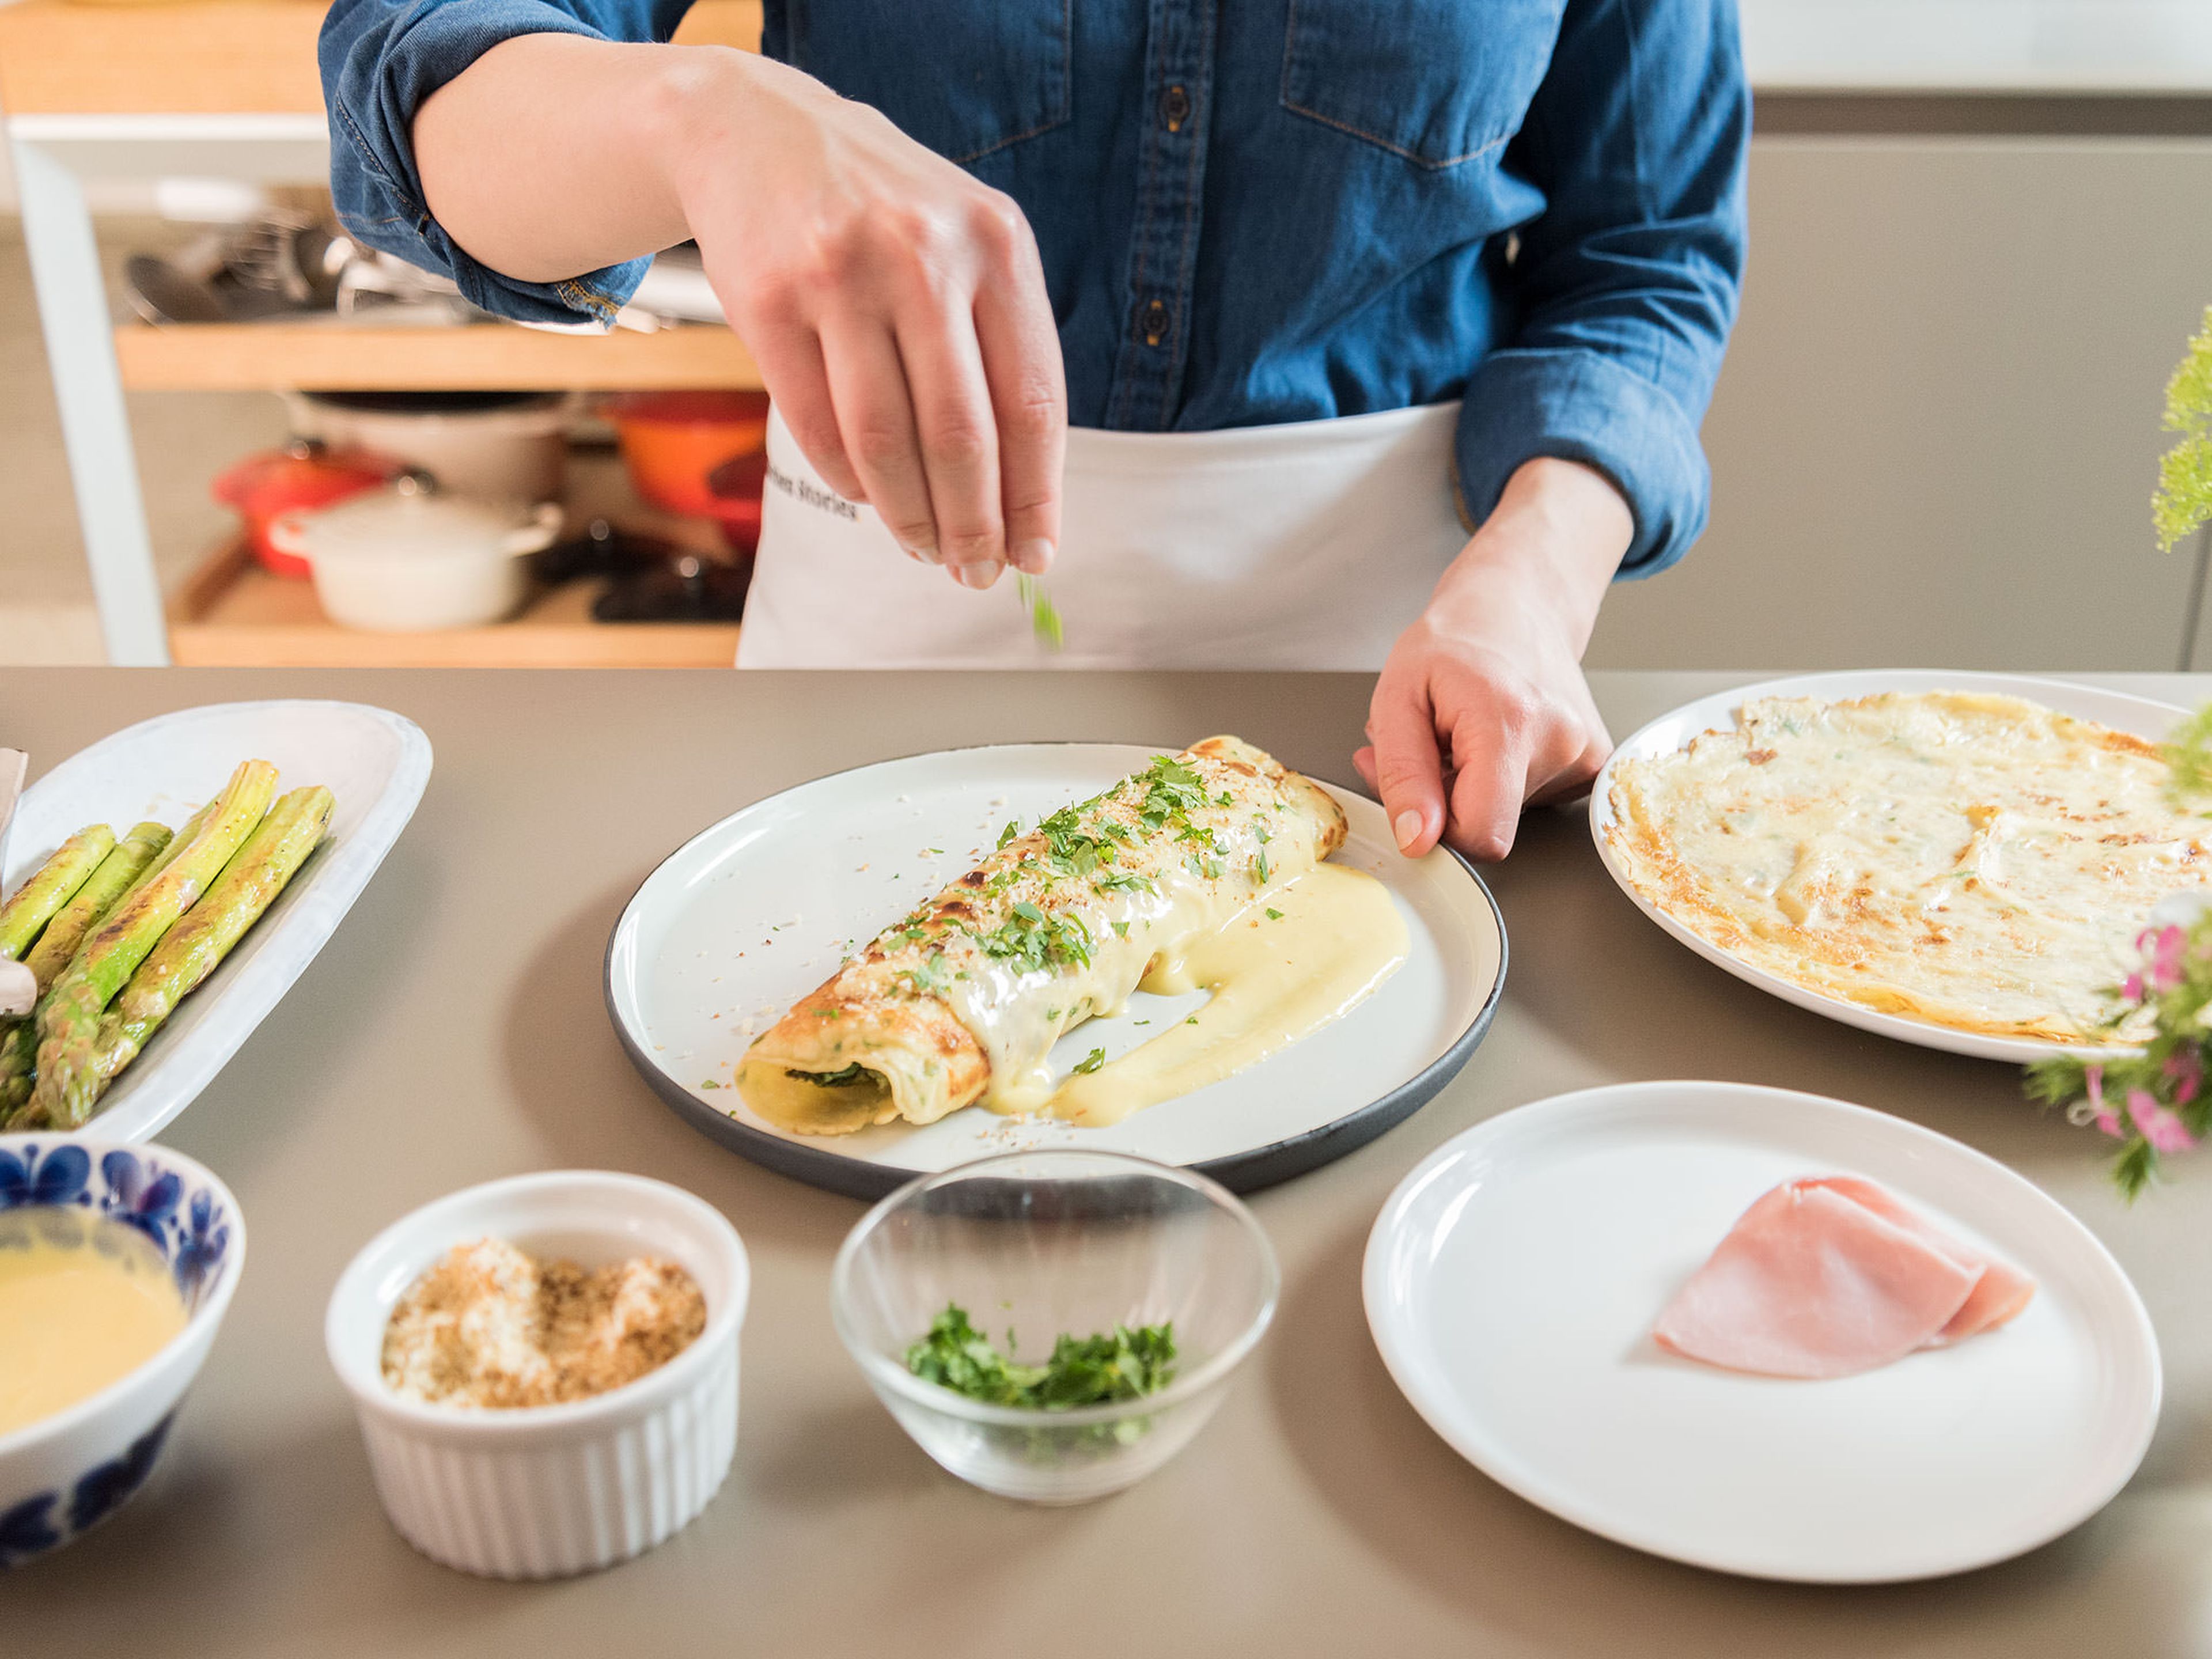 Transfer crêpe to a serving plate. Place two slices of ham and four green asparagus shoots on each crêpe, then roll carefully. Drizzle eggnog hollandaise on top, sprinkle with toasted panko, and garnish with fresh parsley. Enjoy!